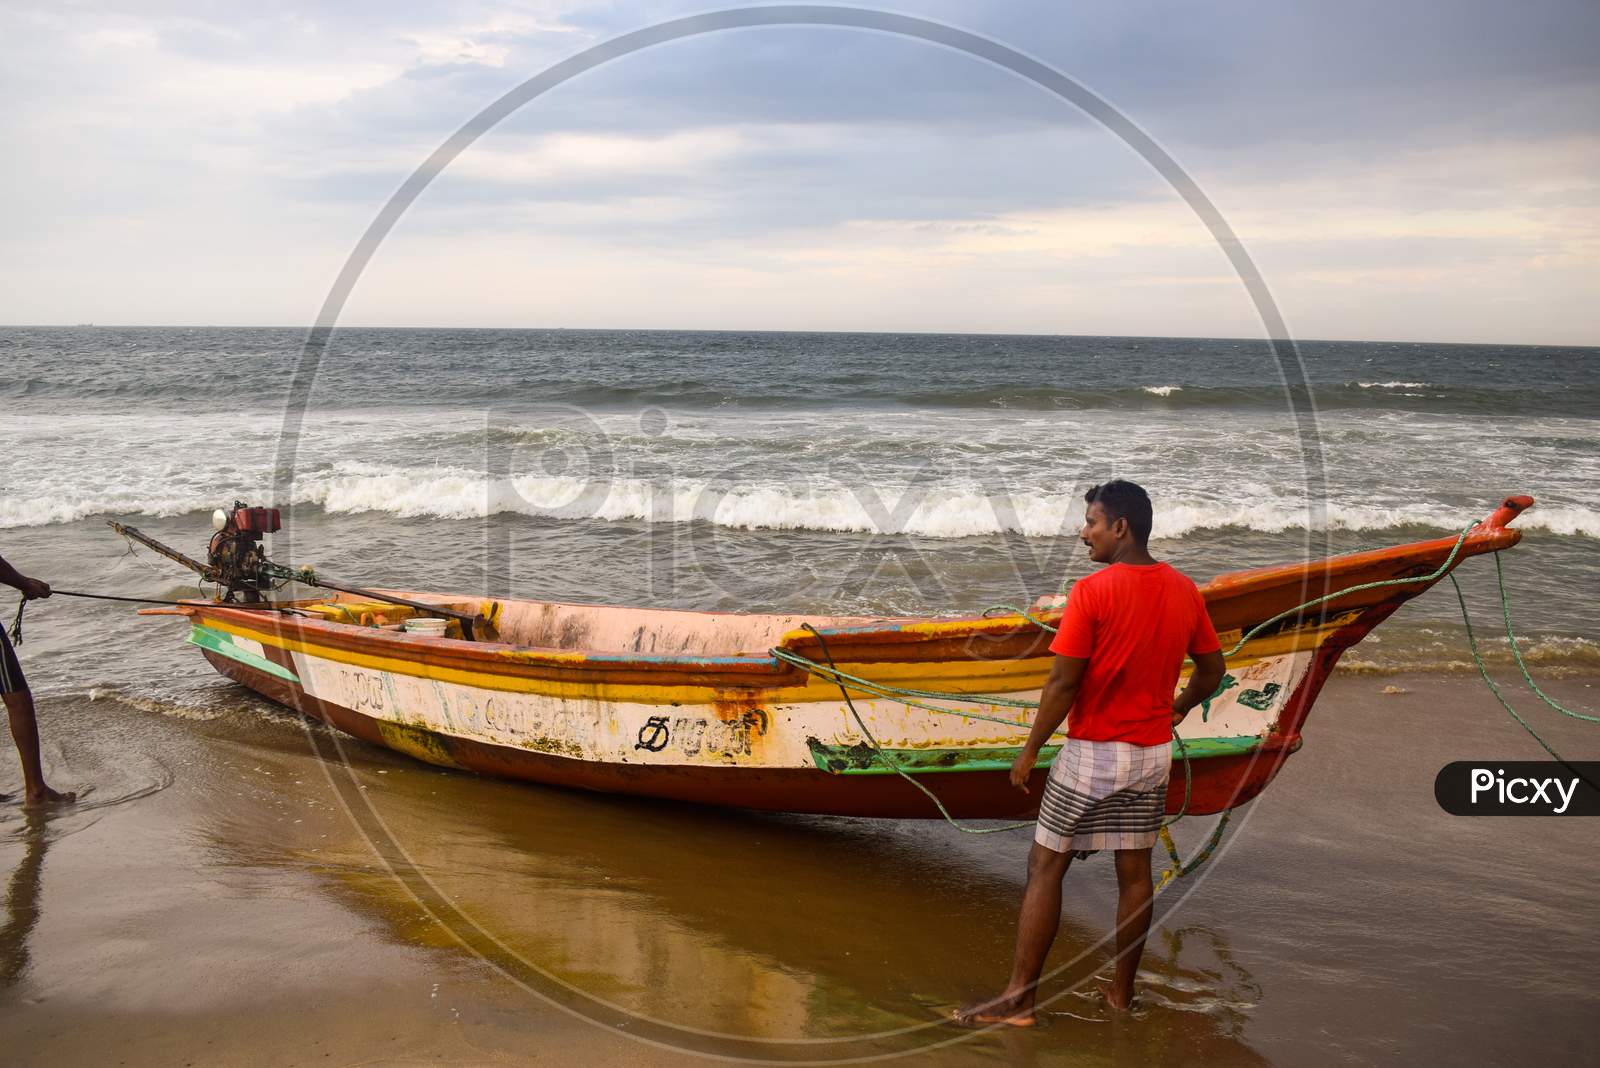 Pondicherry, Puducherry, Karnataka, 2019 : Fisherman pulling their boat out of water and cancelling their plan of fishing after high tide alert